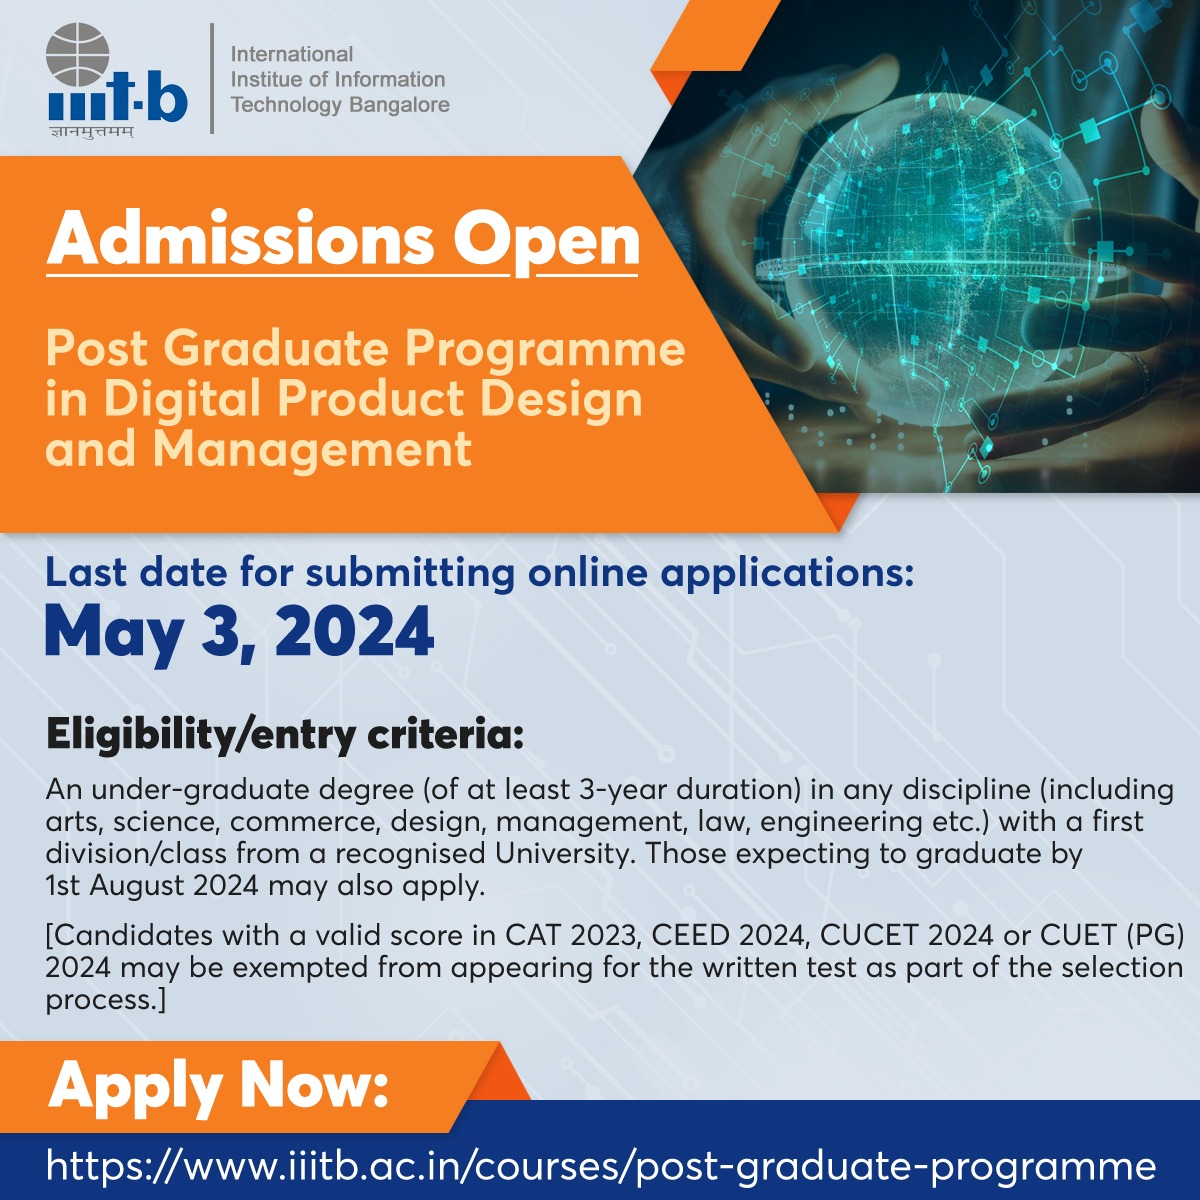 #AdmissionsOpen Post Graduate Programme in Digital Product Design and Management Last date for submitting online applications: May 3, 2024 Apply Now: iiitb.ac.in/courses/post-g… #IIITB #IIITBangalore #AdmissionsOpen #PGPDPDM